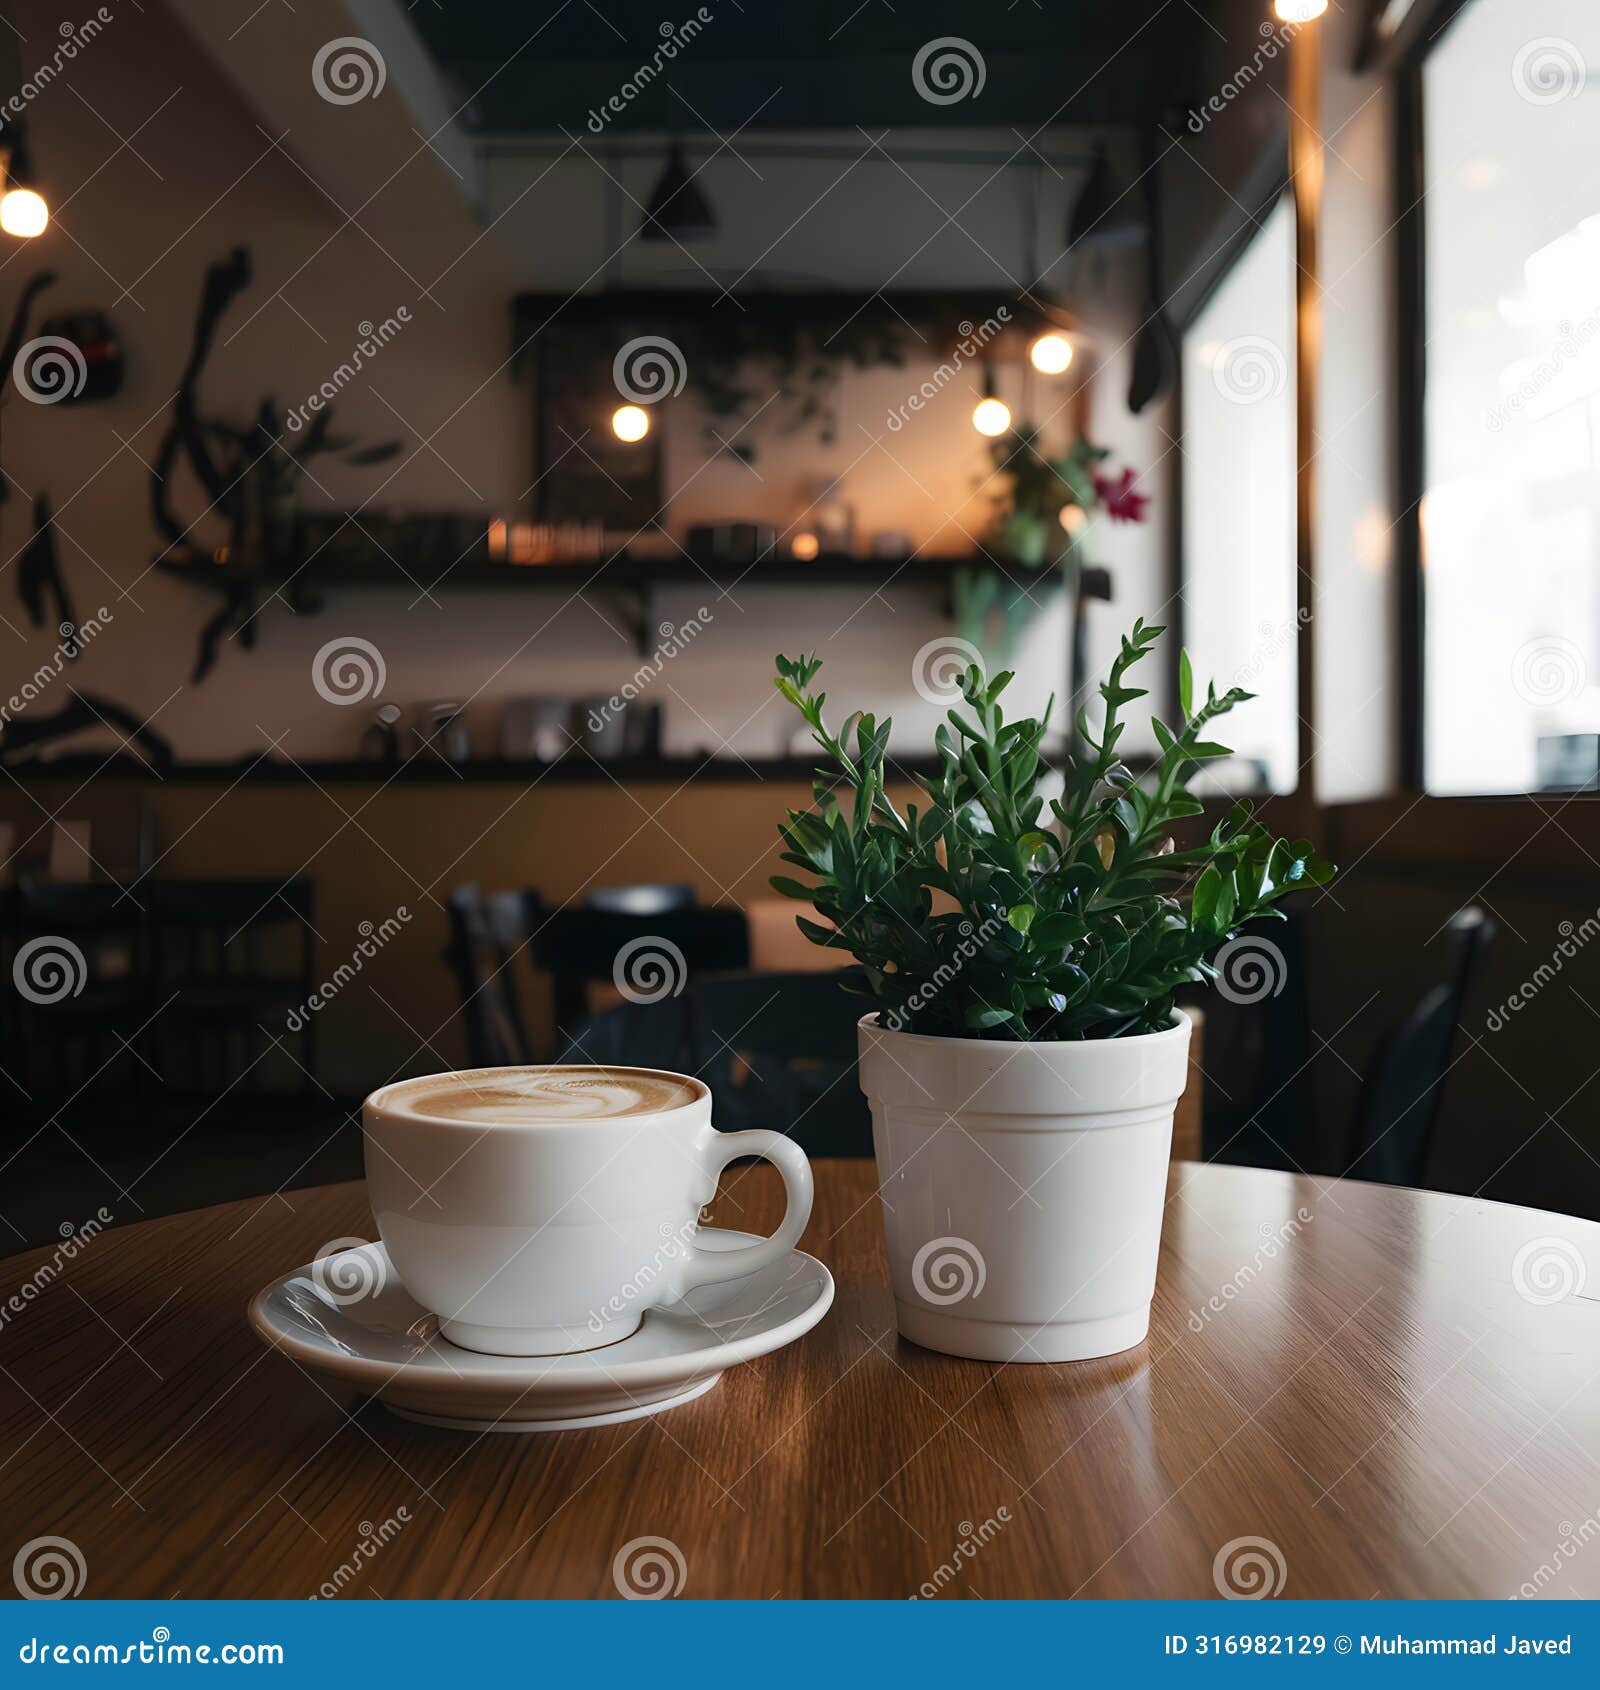 coffee cup and plant adorn table in cozy coffee shop interior